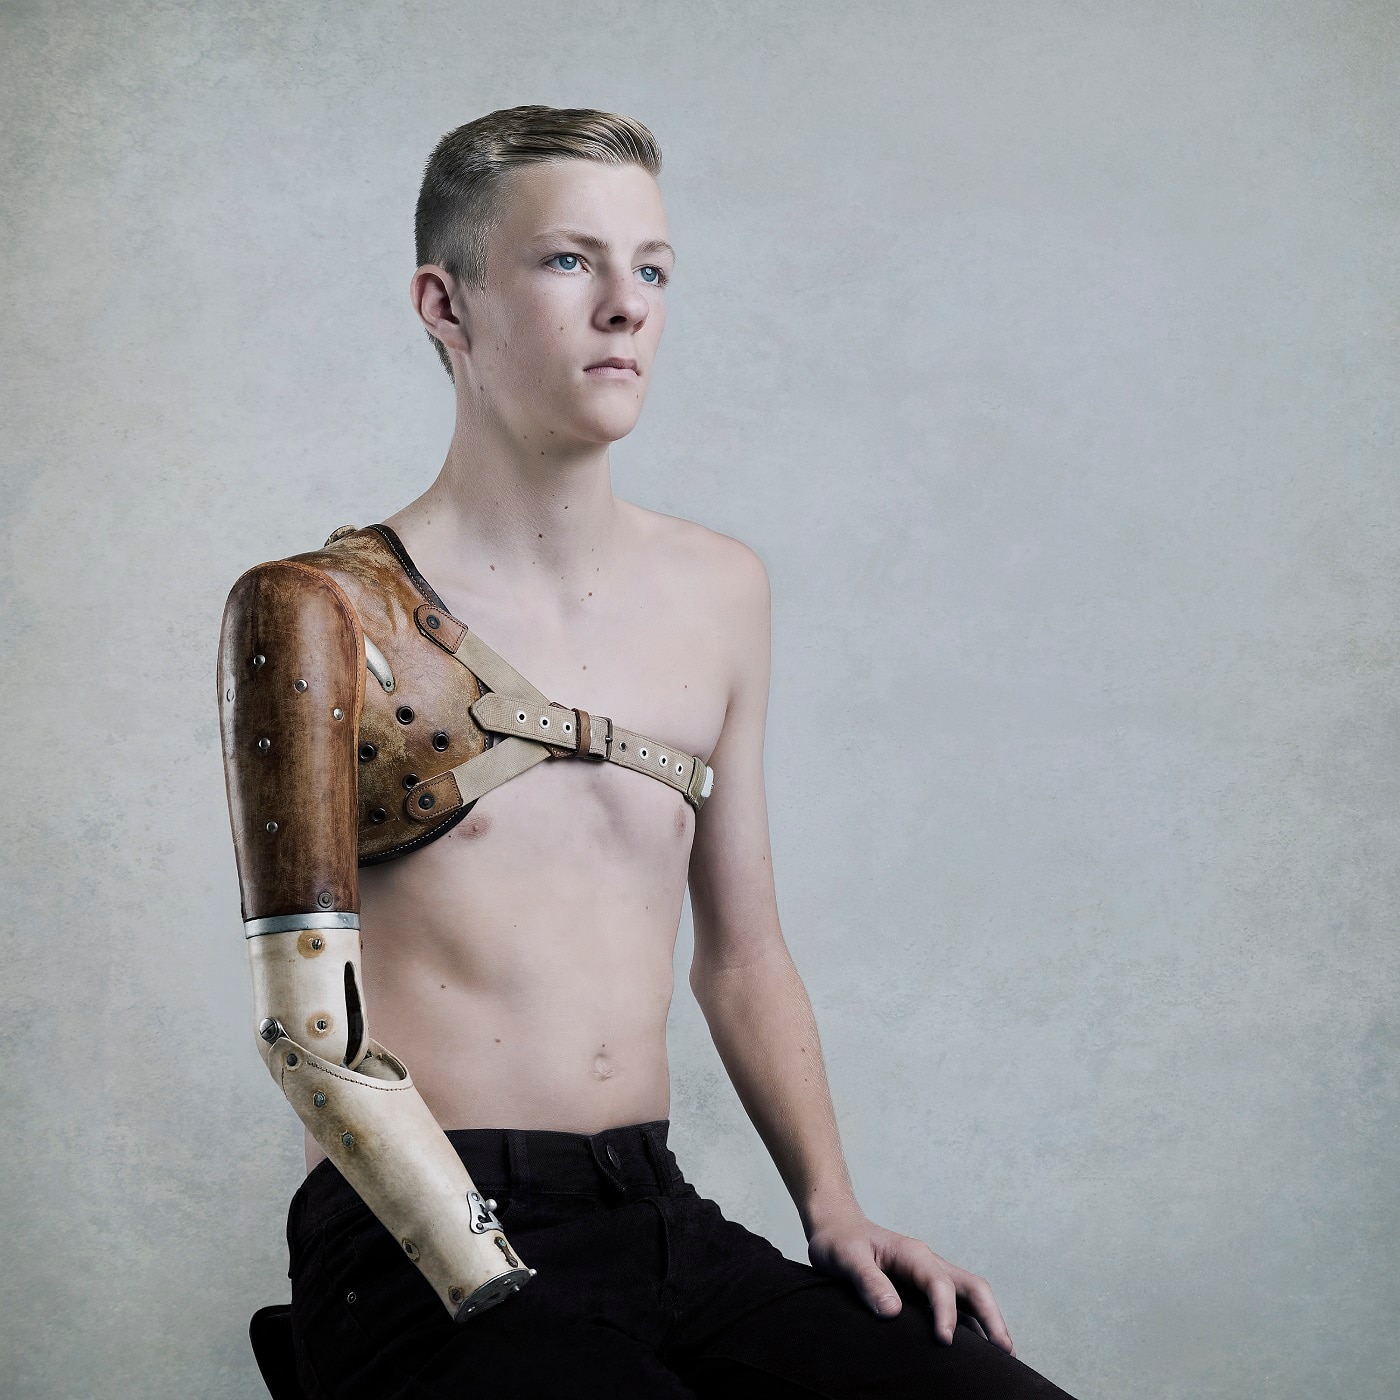 A young man sits shirtless wearing a prosthetic arm.